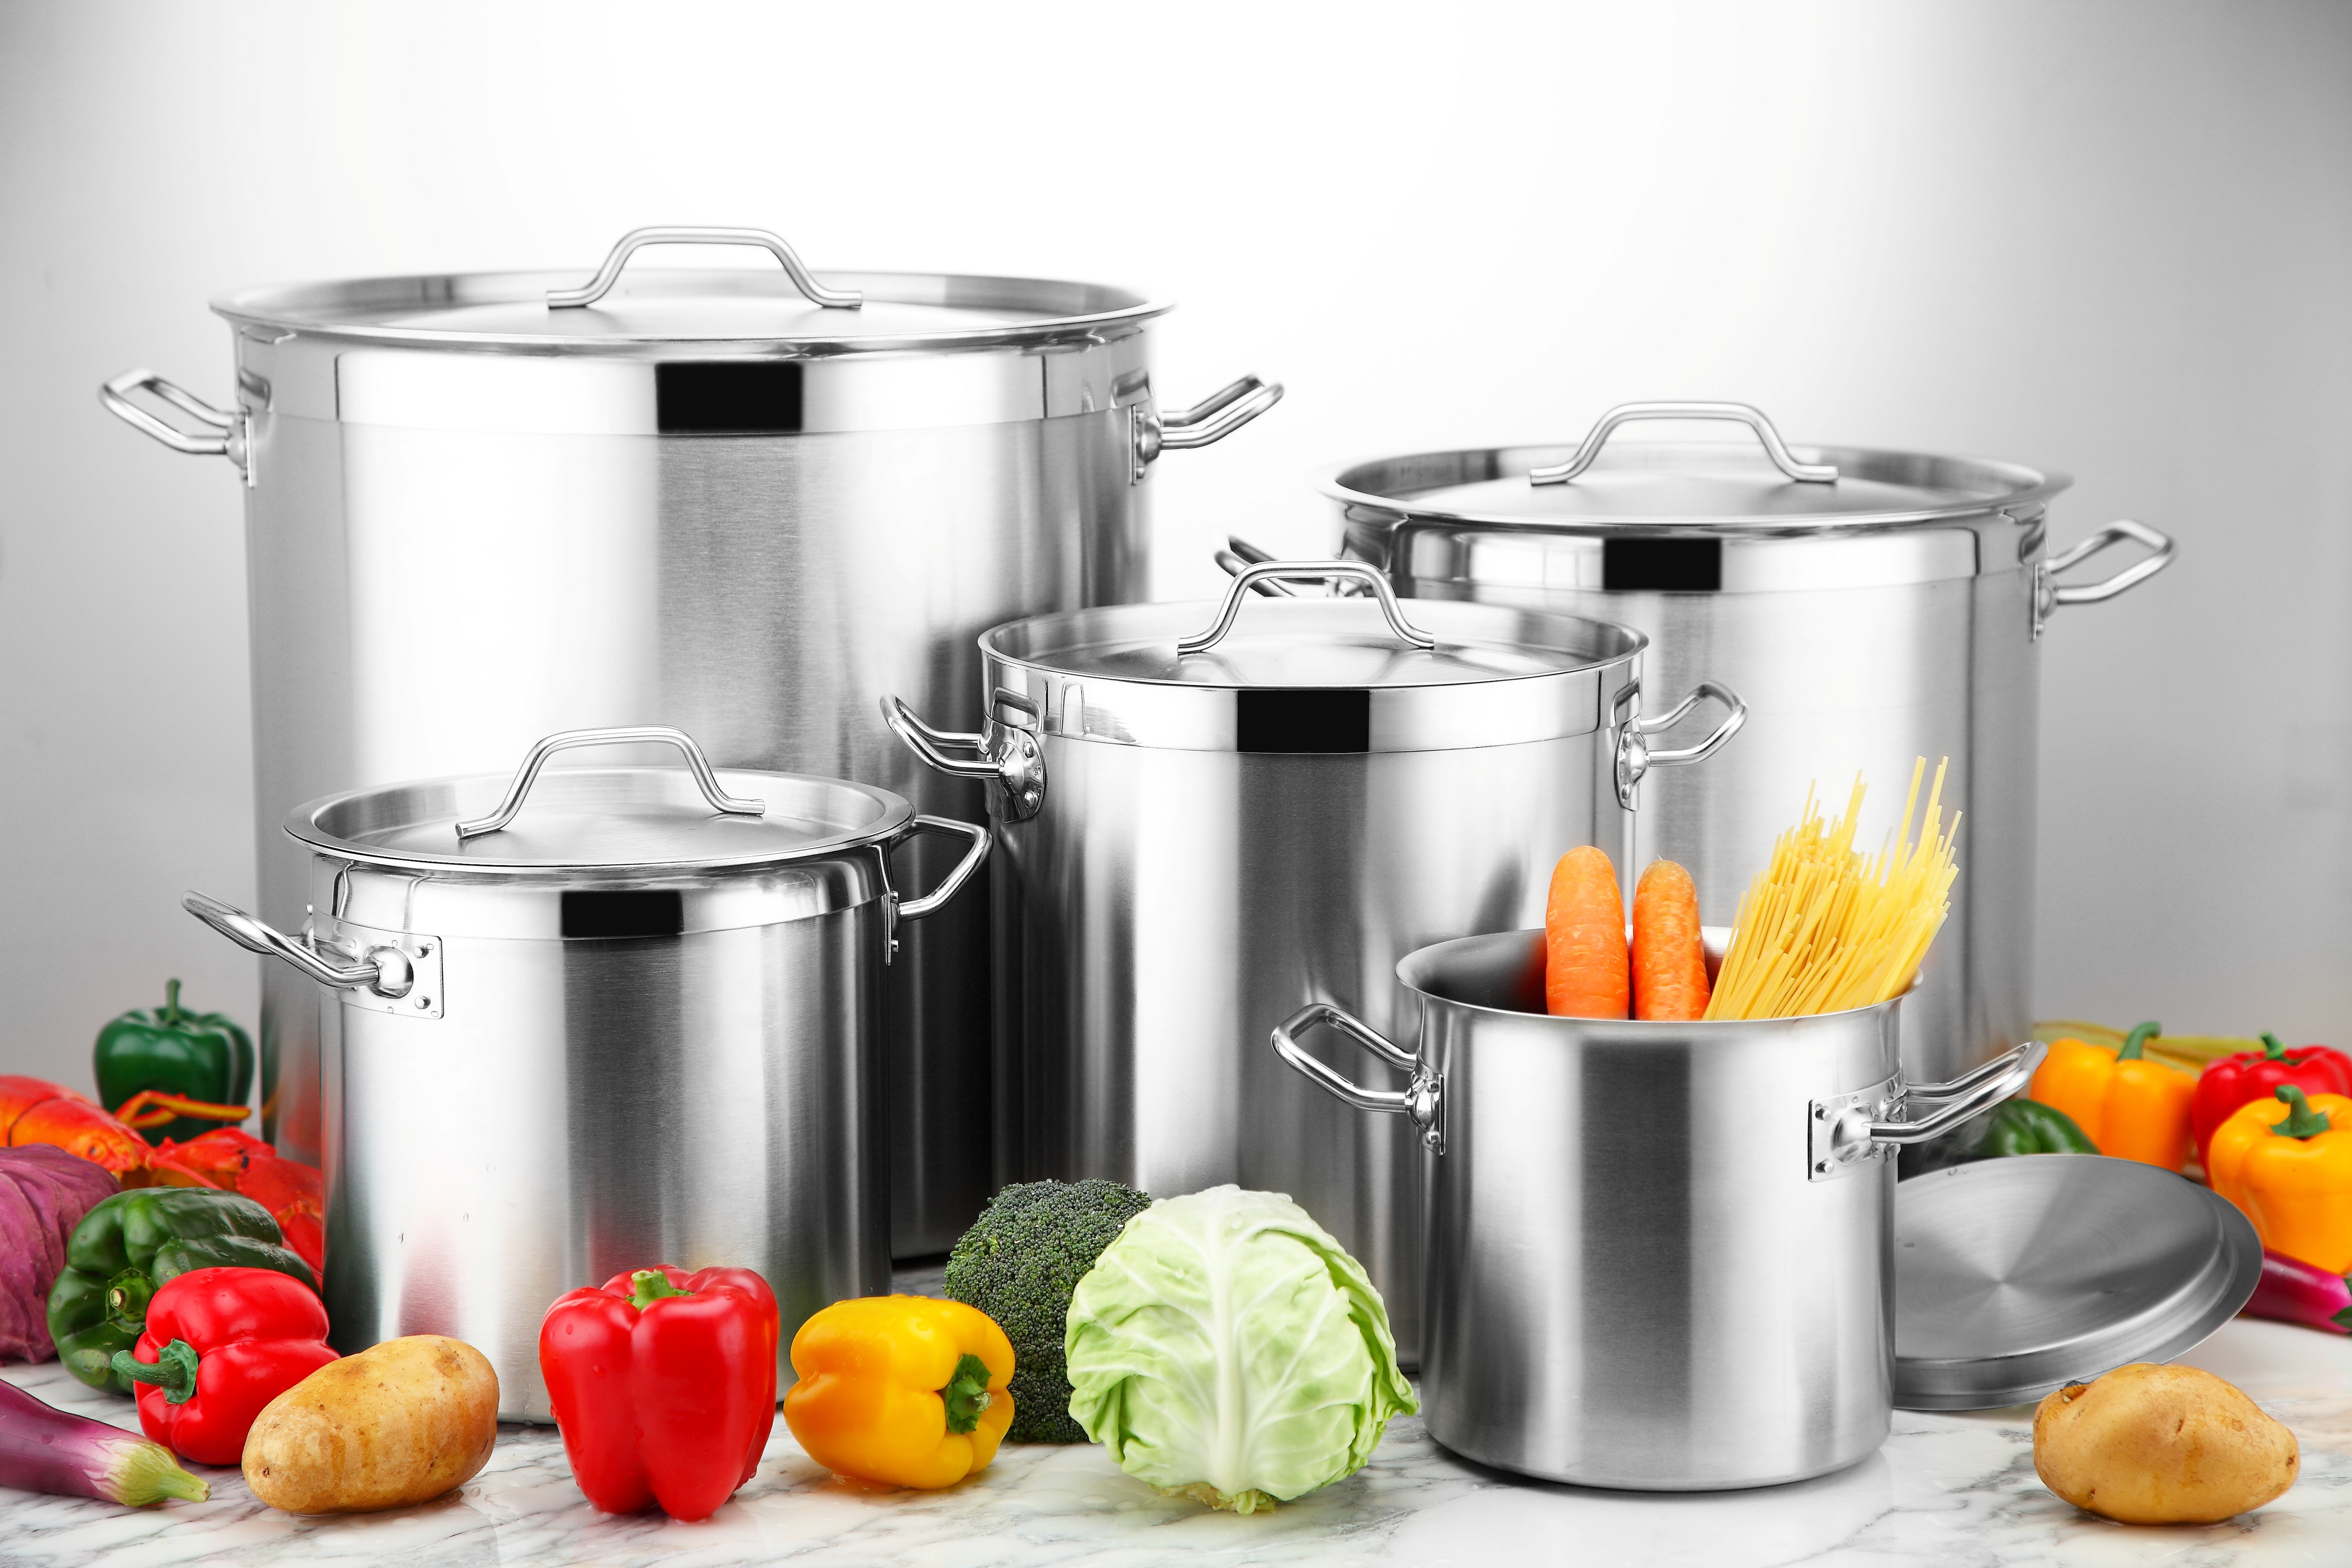 House Essentials Stainless Steel Stockpots